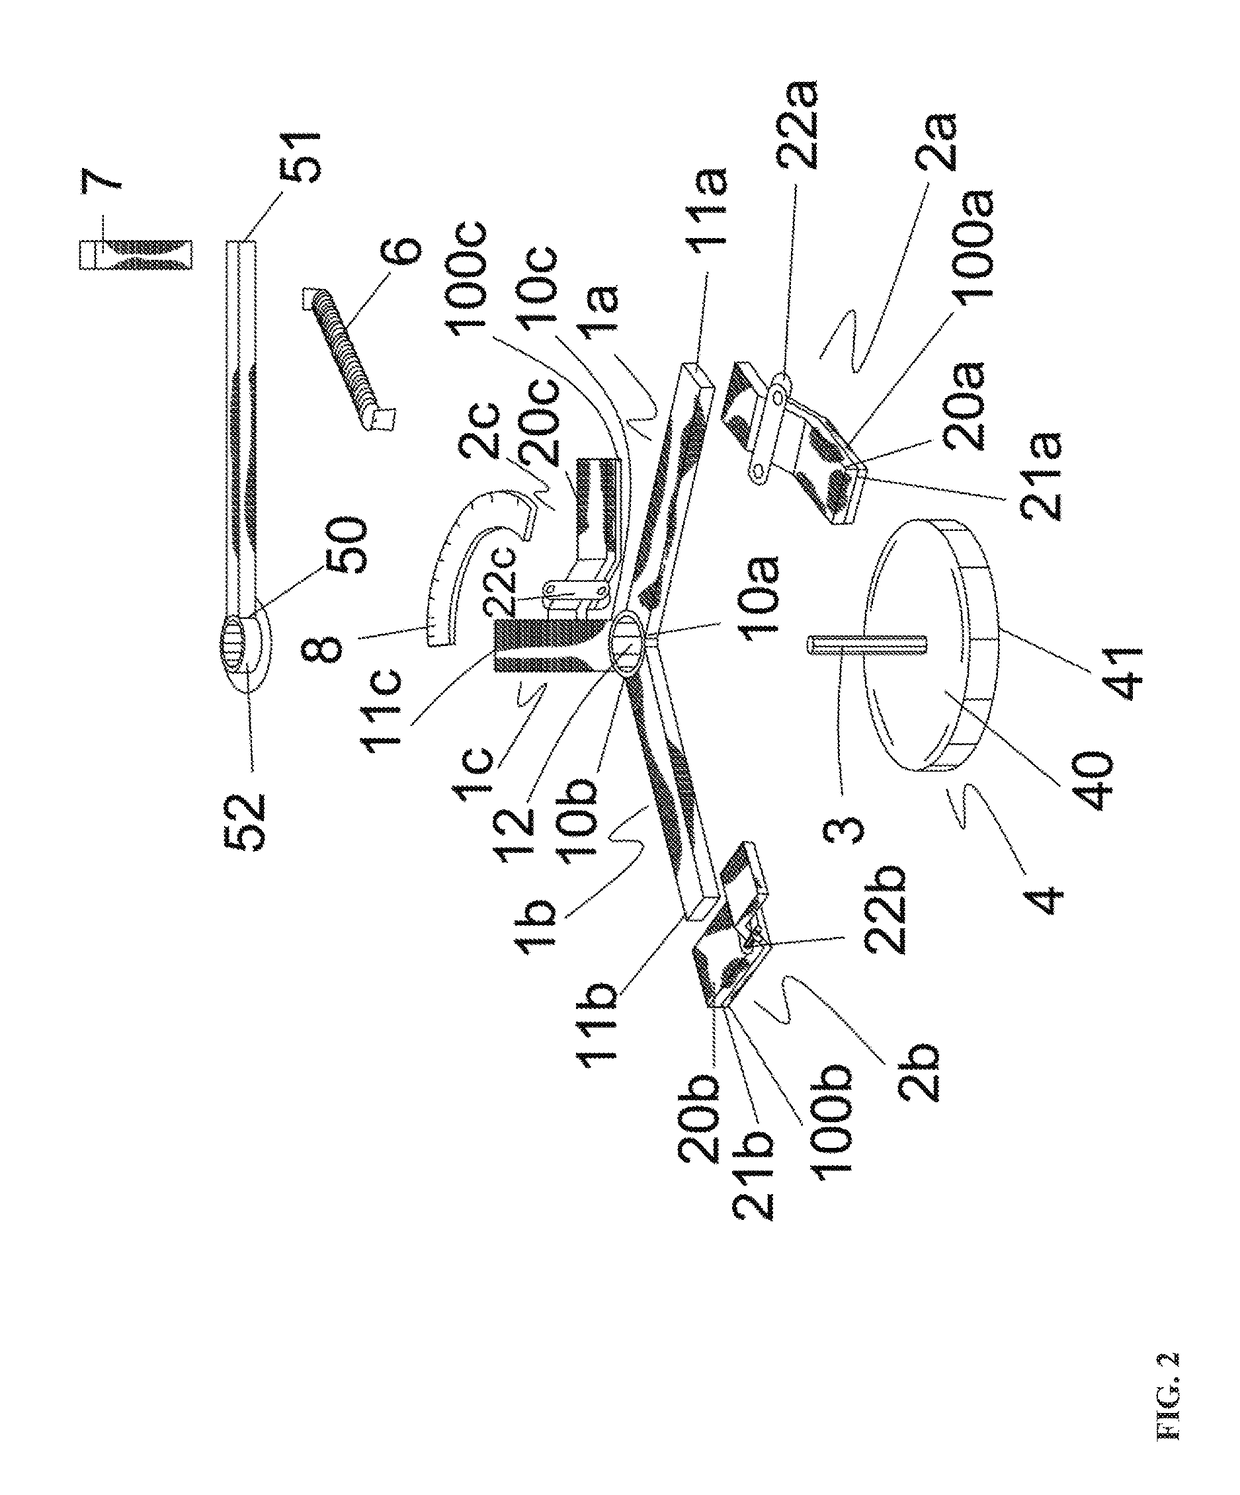 Device for measuring and comparing tire to pavement skid resistance